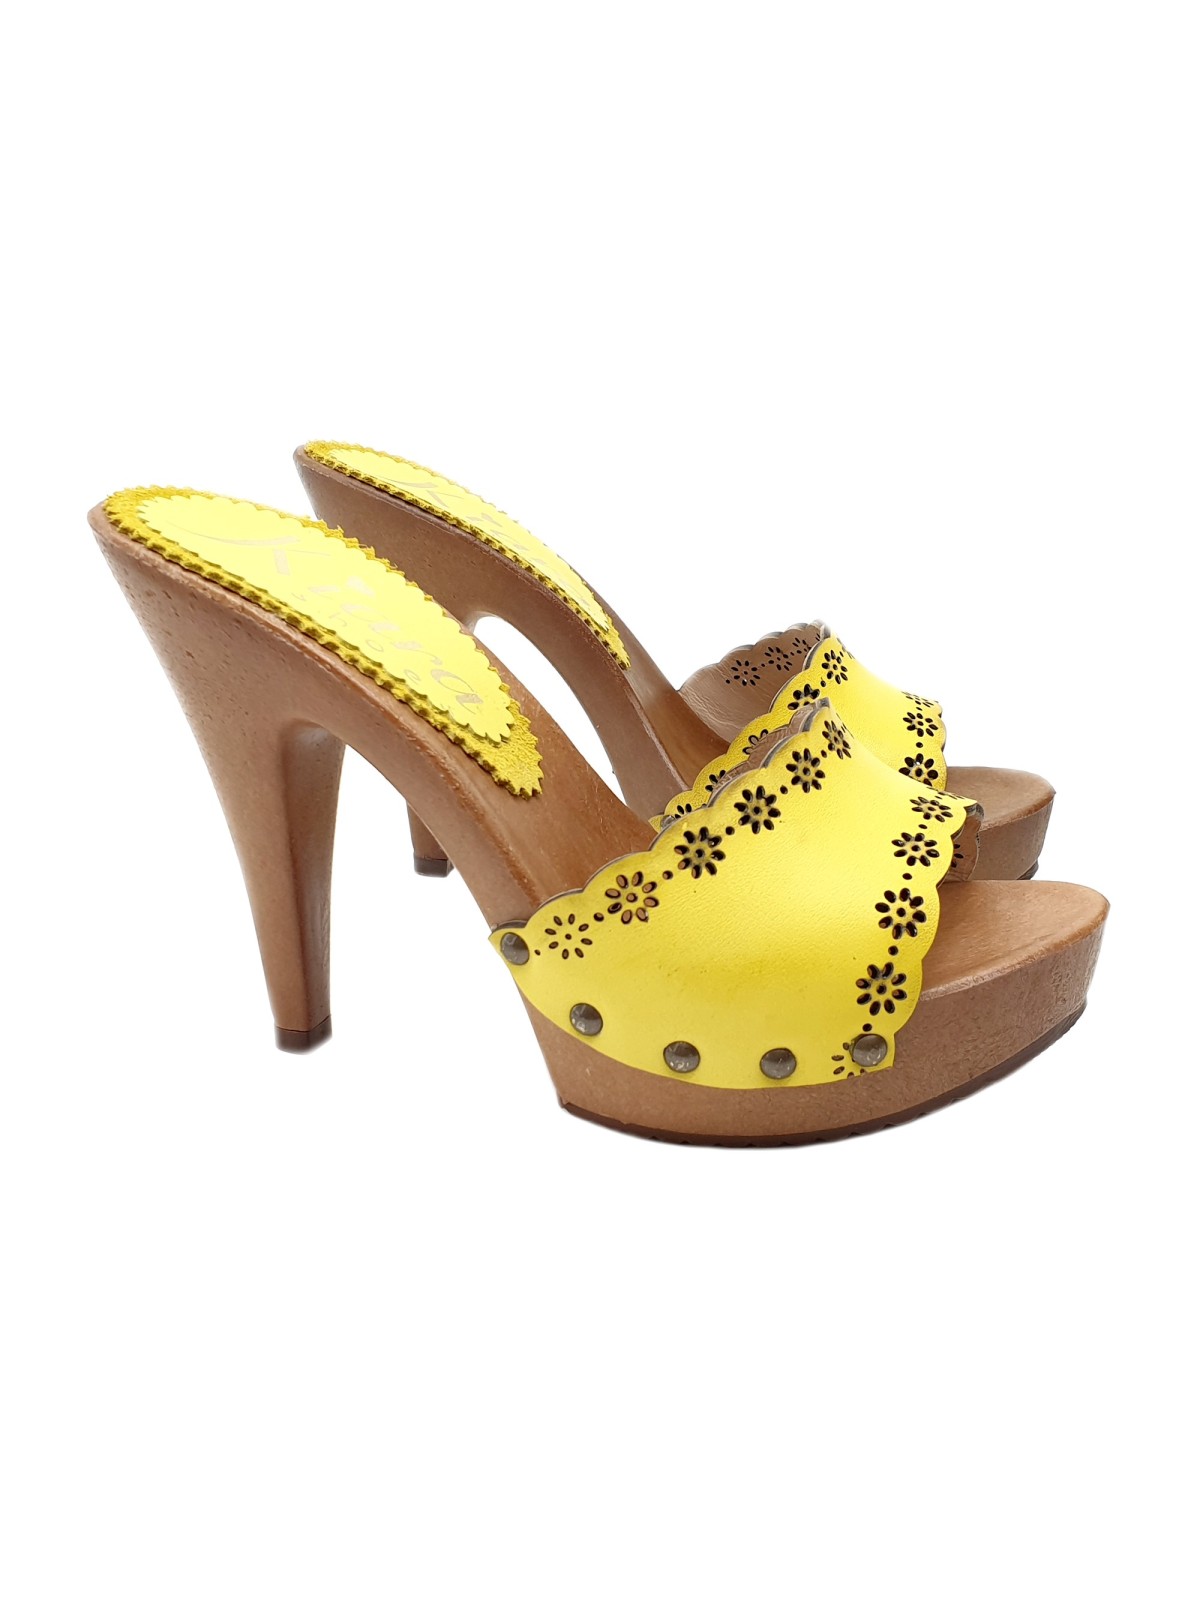 CLOGS WITH LASERED BAND IN YELLOW LEATHER